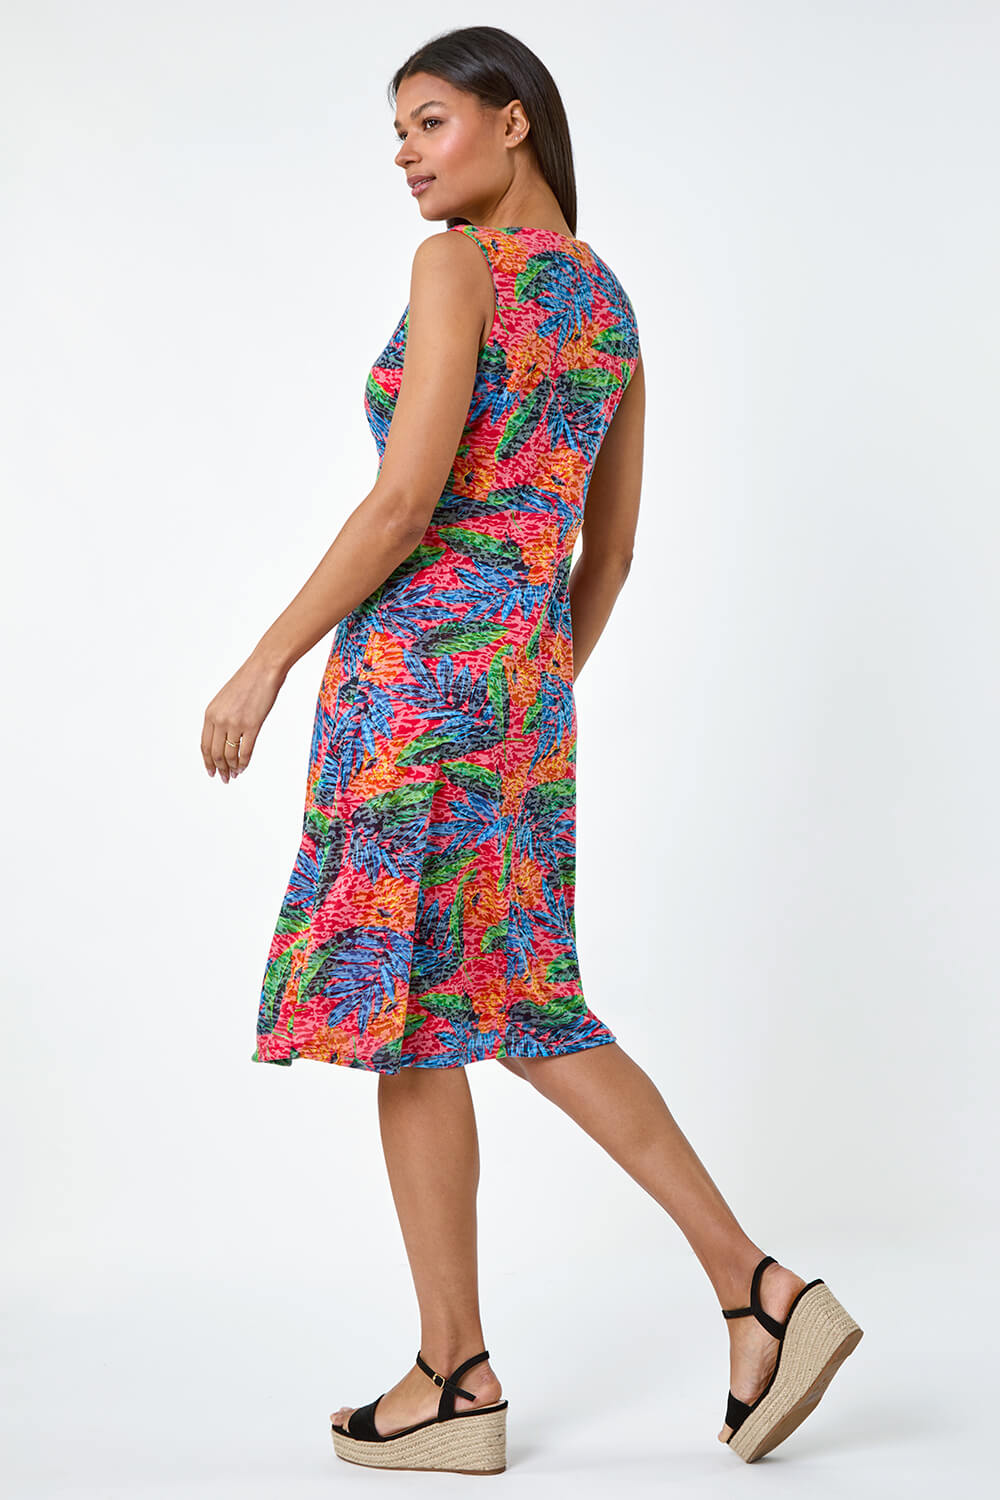 Red Burnout Tropical Print Stretch Dress, Image 3 of 5